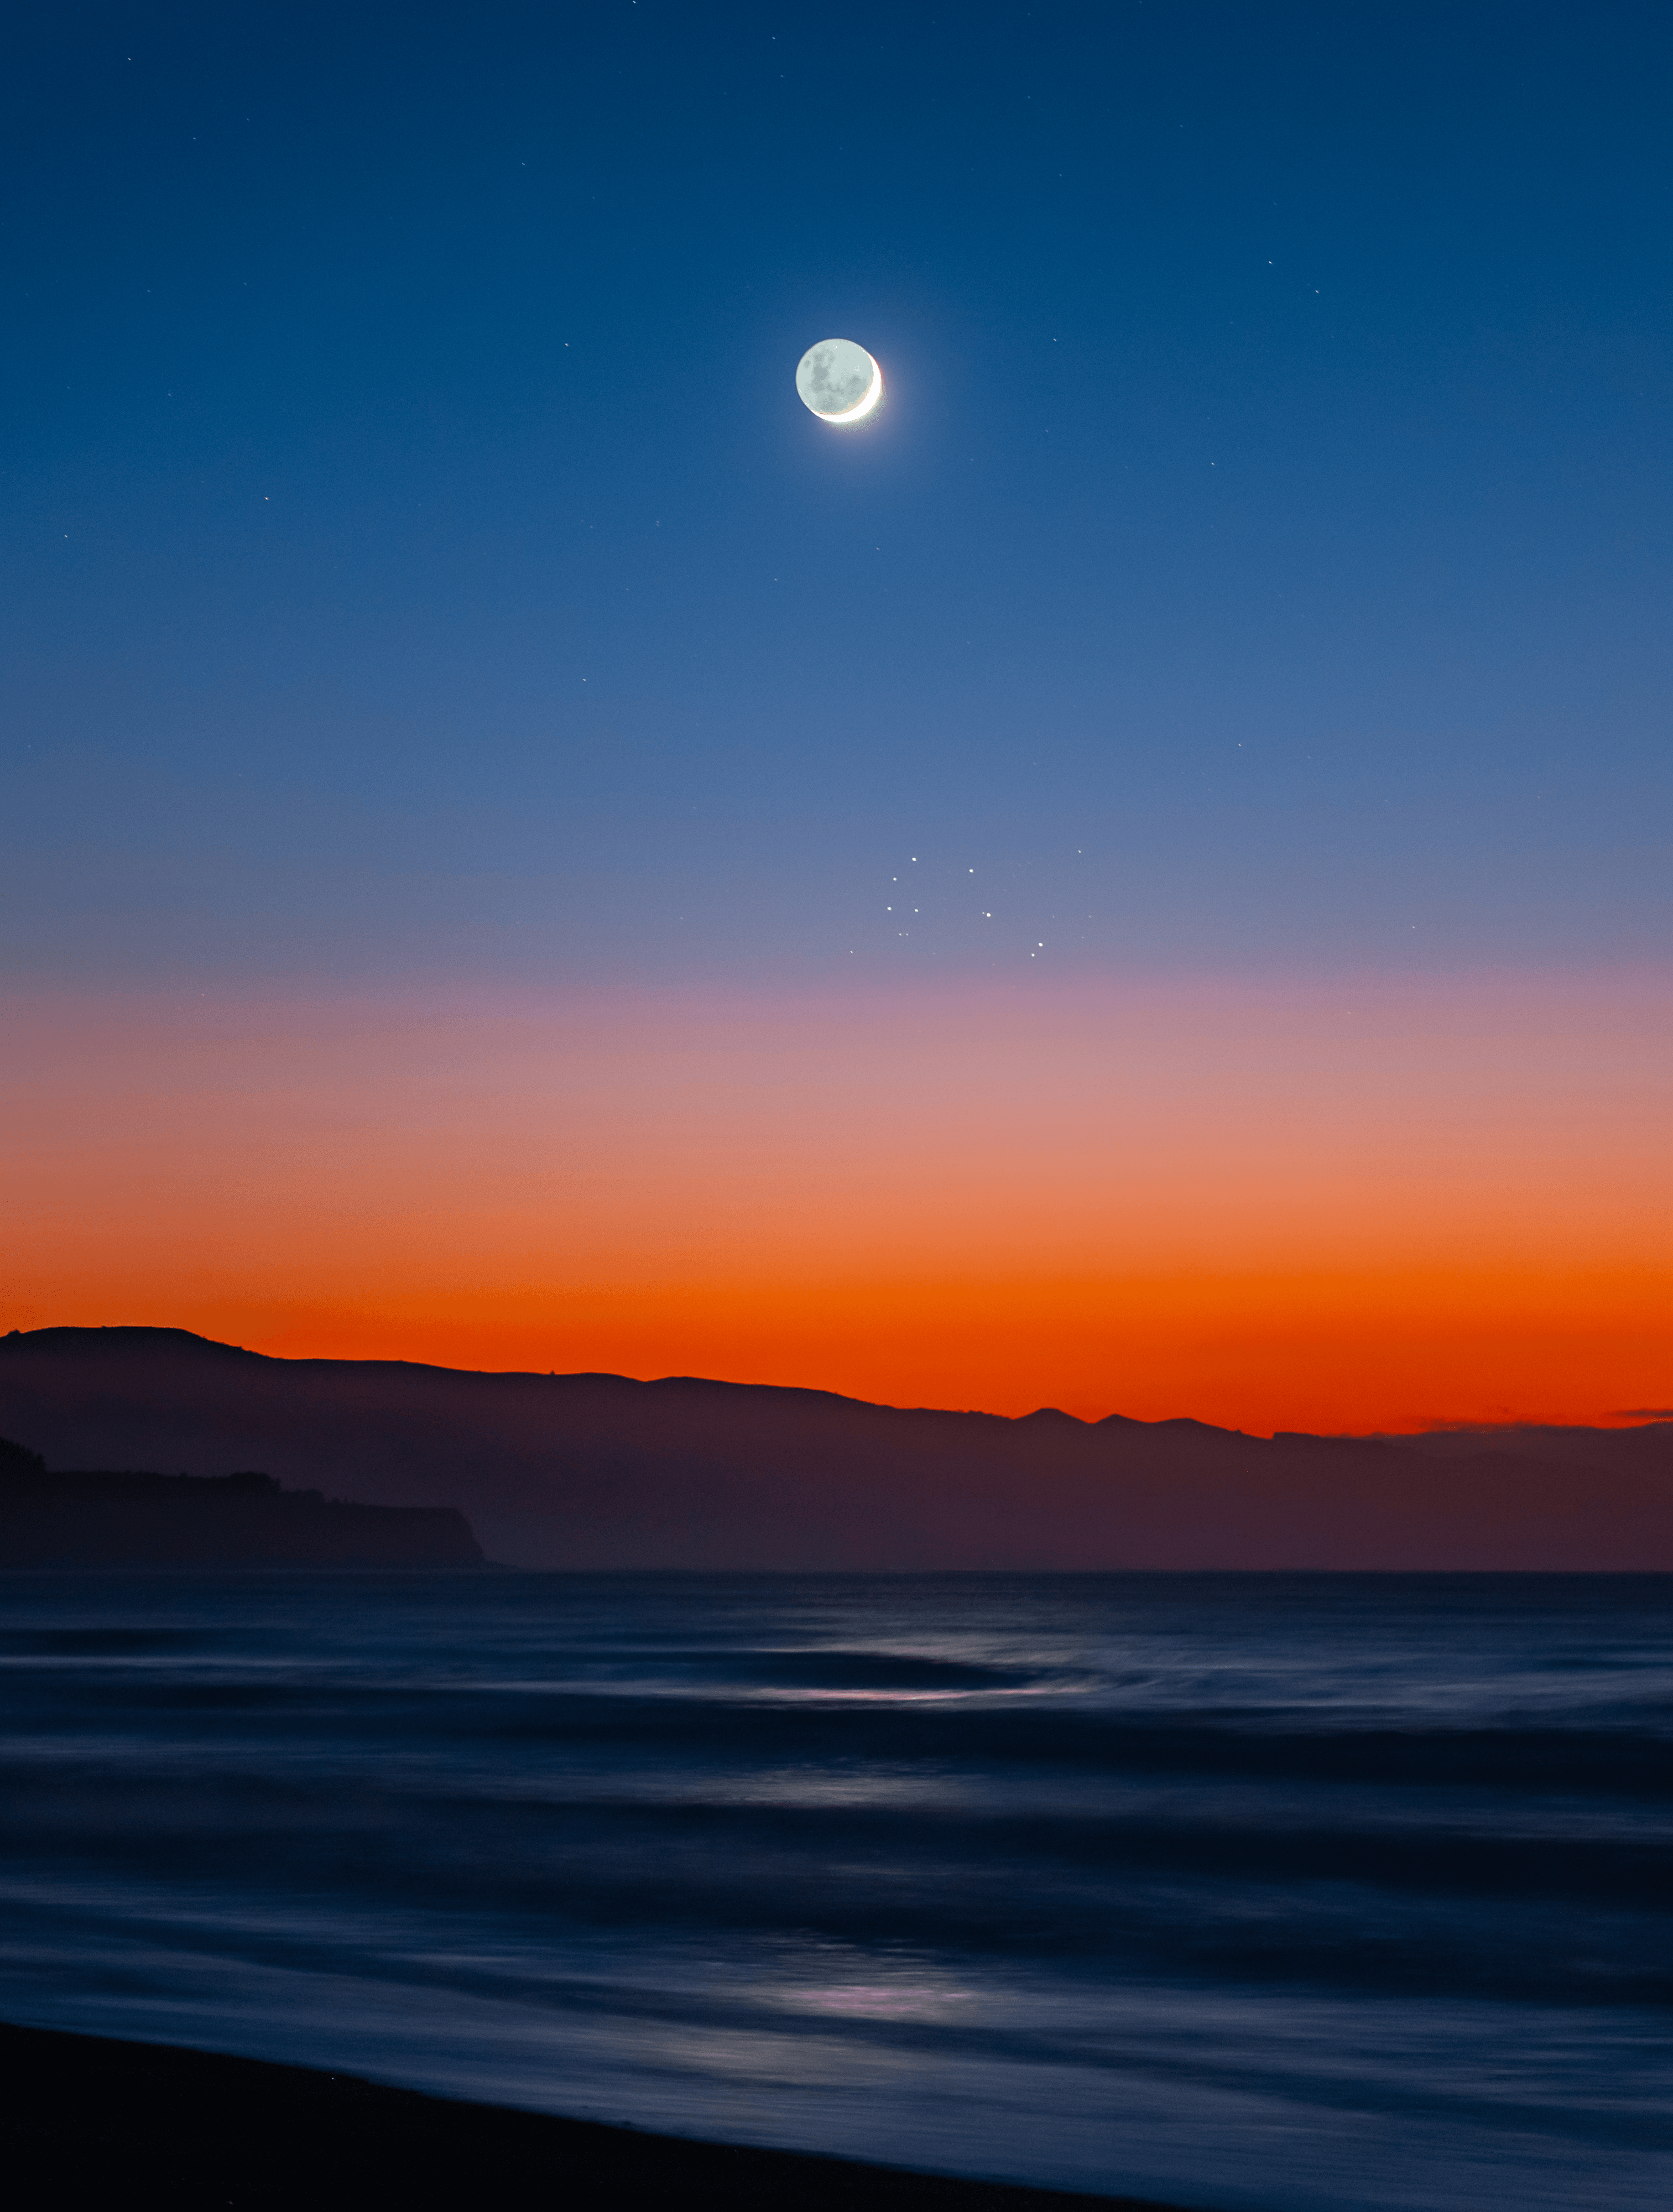 Omutu Radiance: A Captivating Glimpse of Crescent Moon and Dawn's Awakening